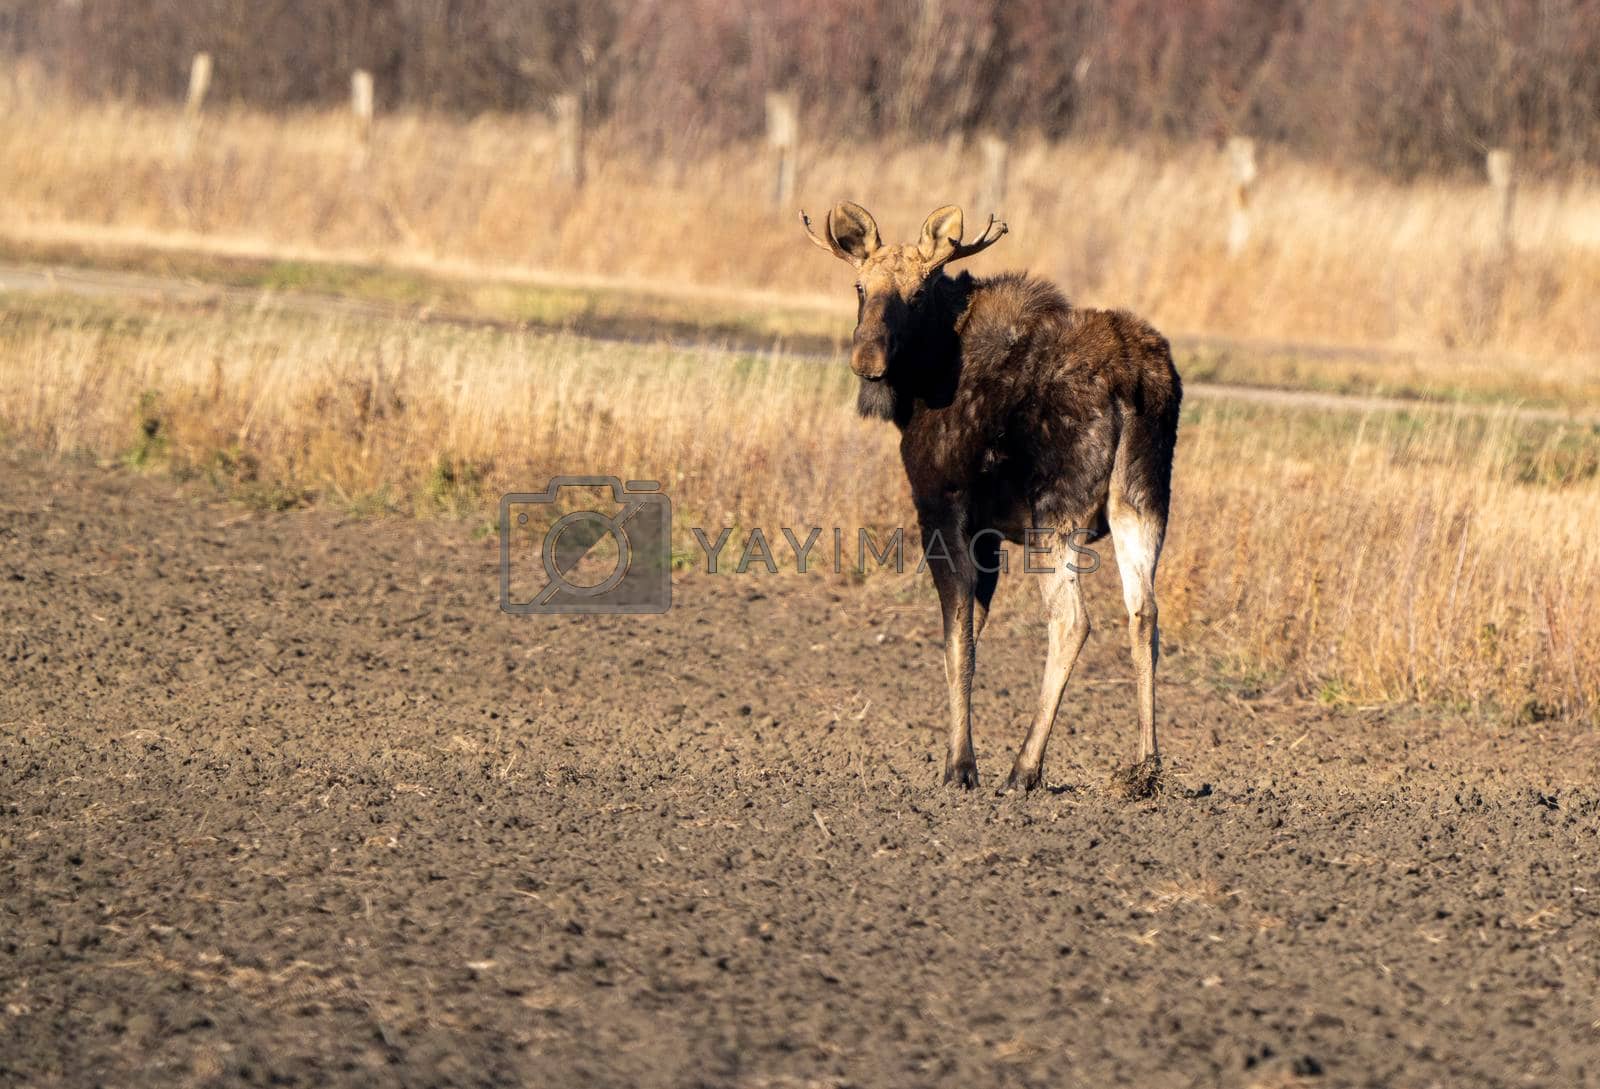 Royalty free image of Wild Prairie Moose by pictureguy